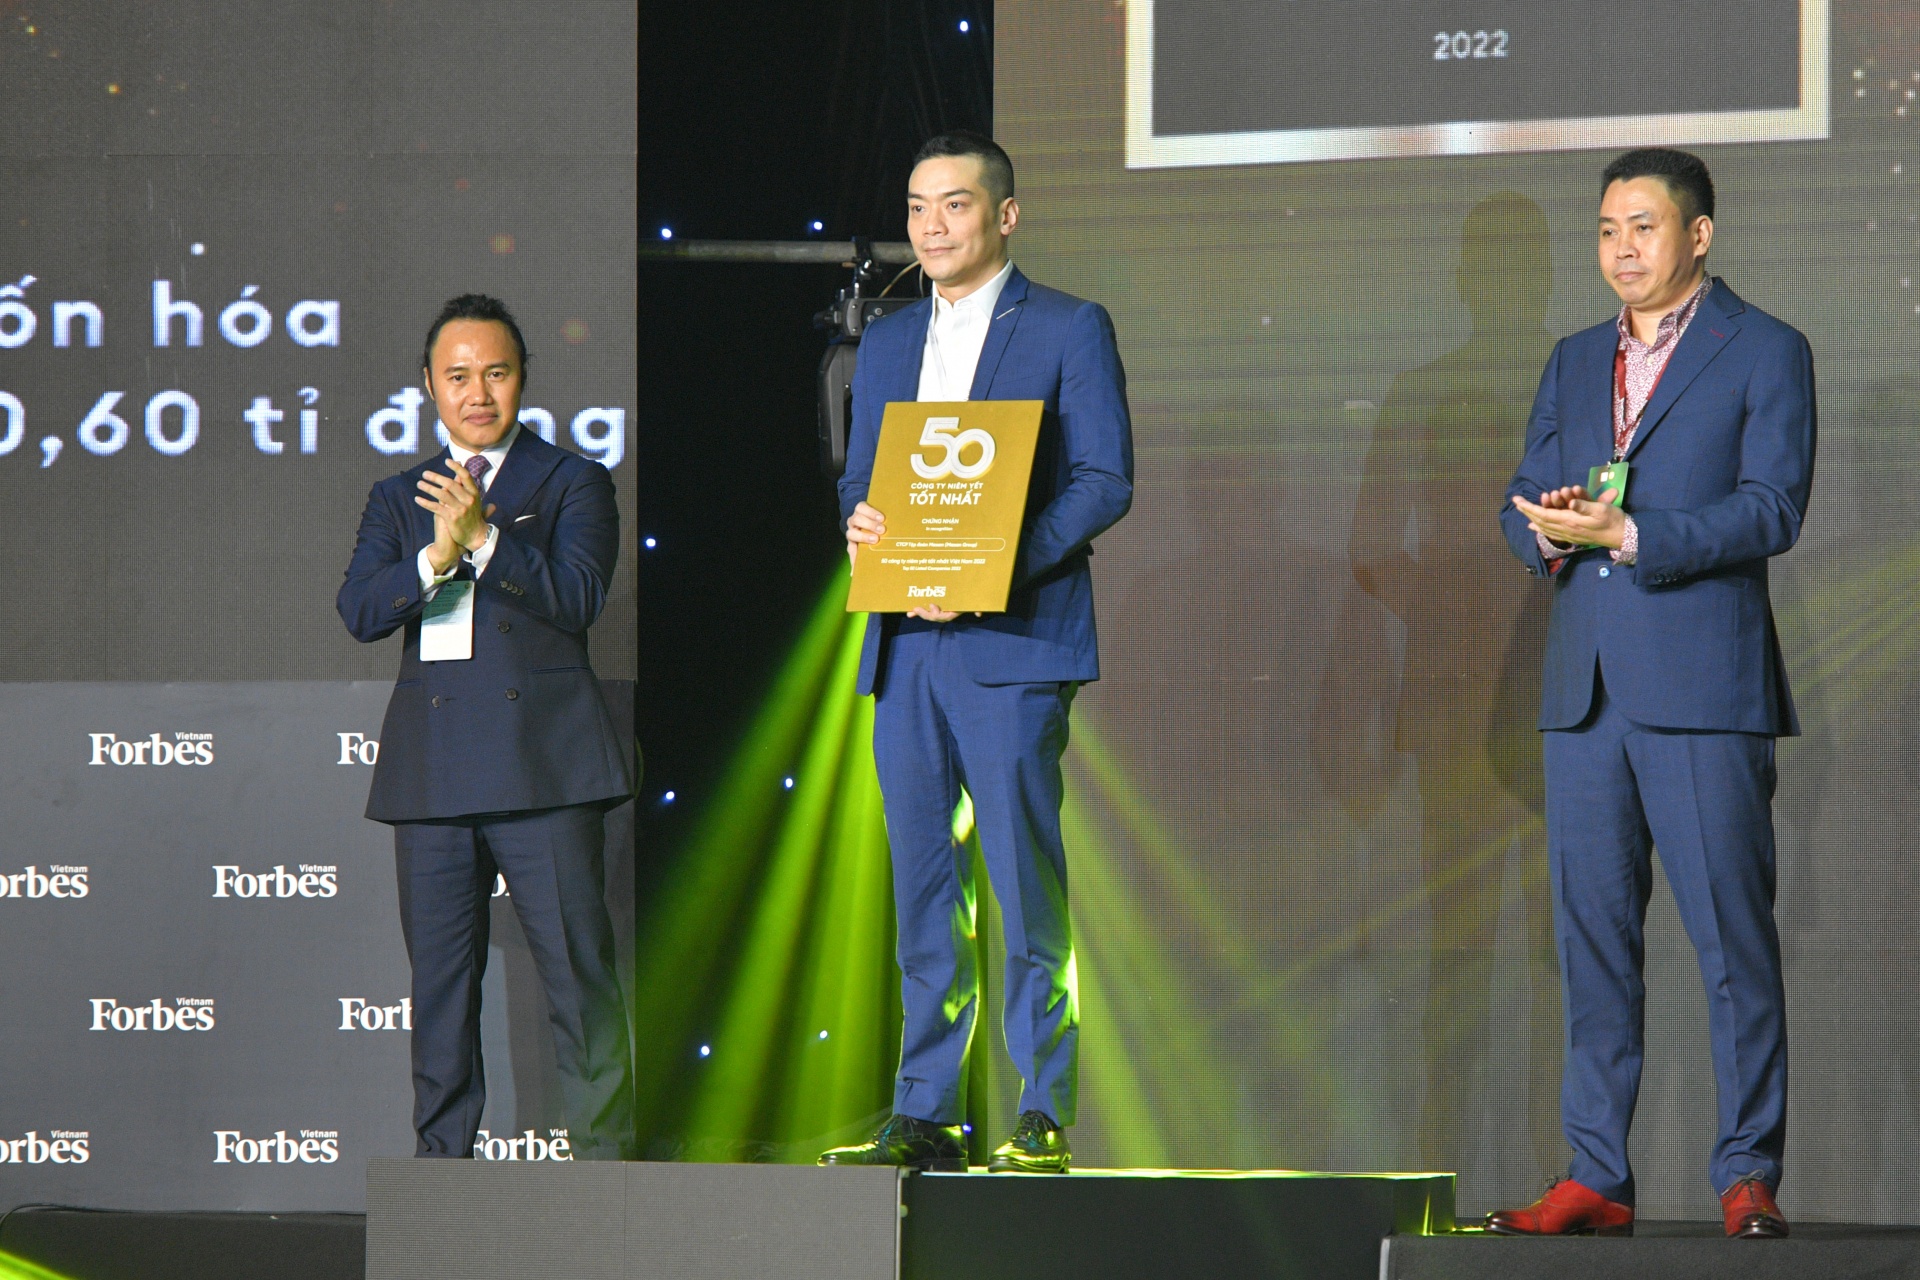 Masan honoured among top 50 businesses at Corporate Sustainability Awards